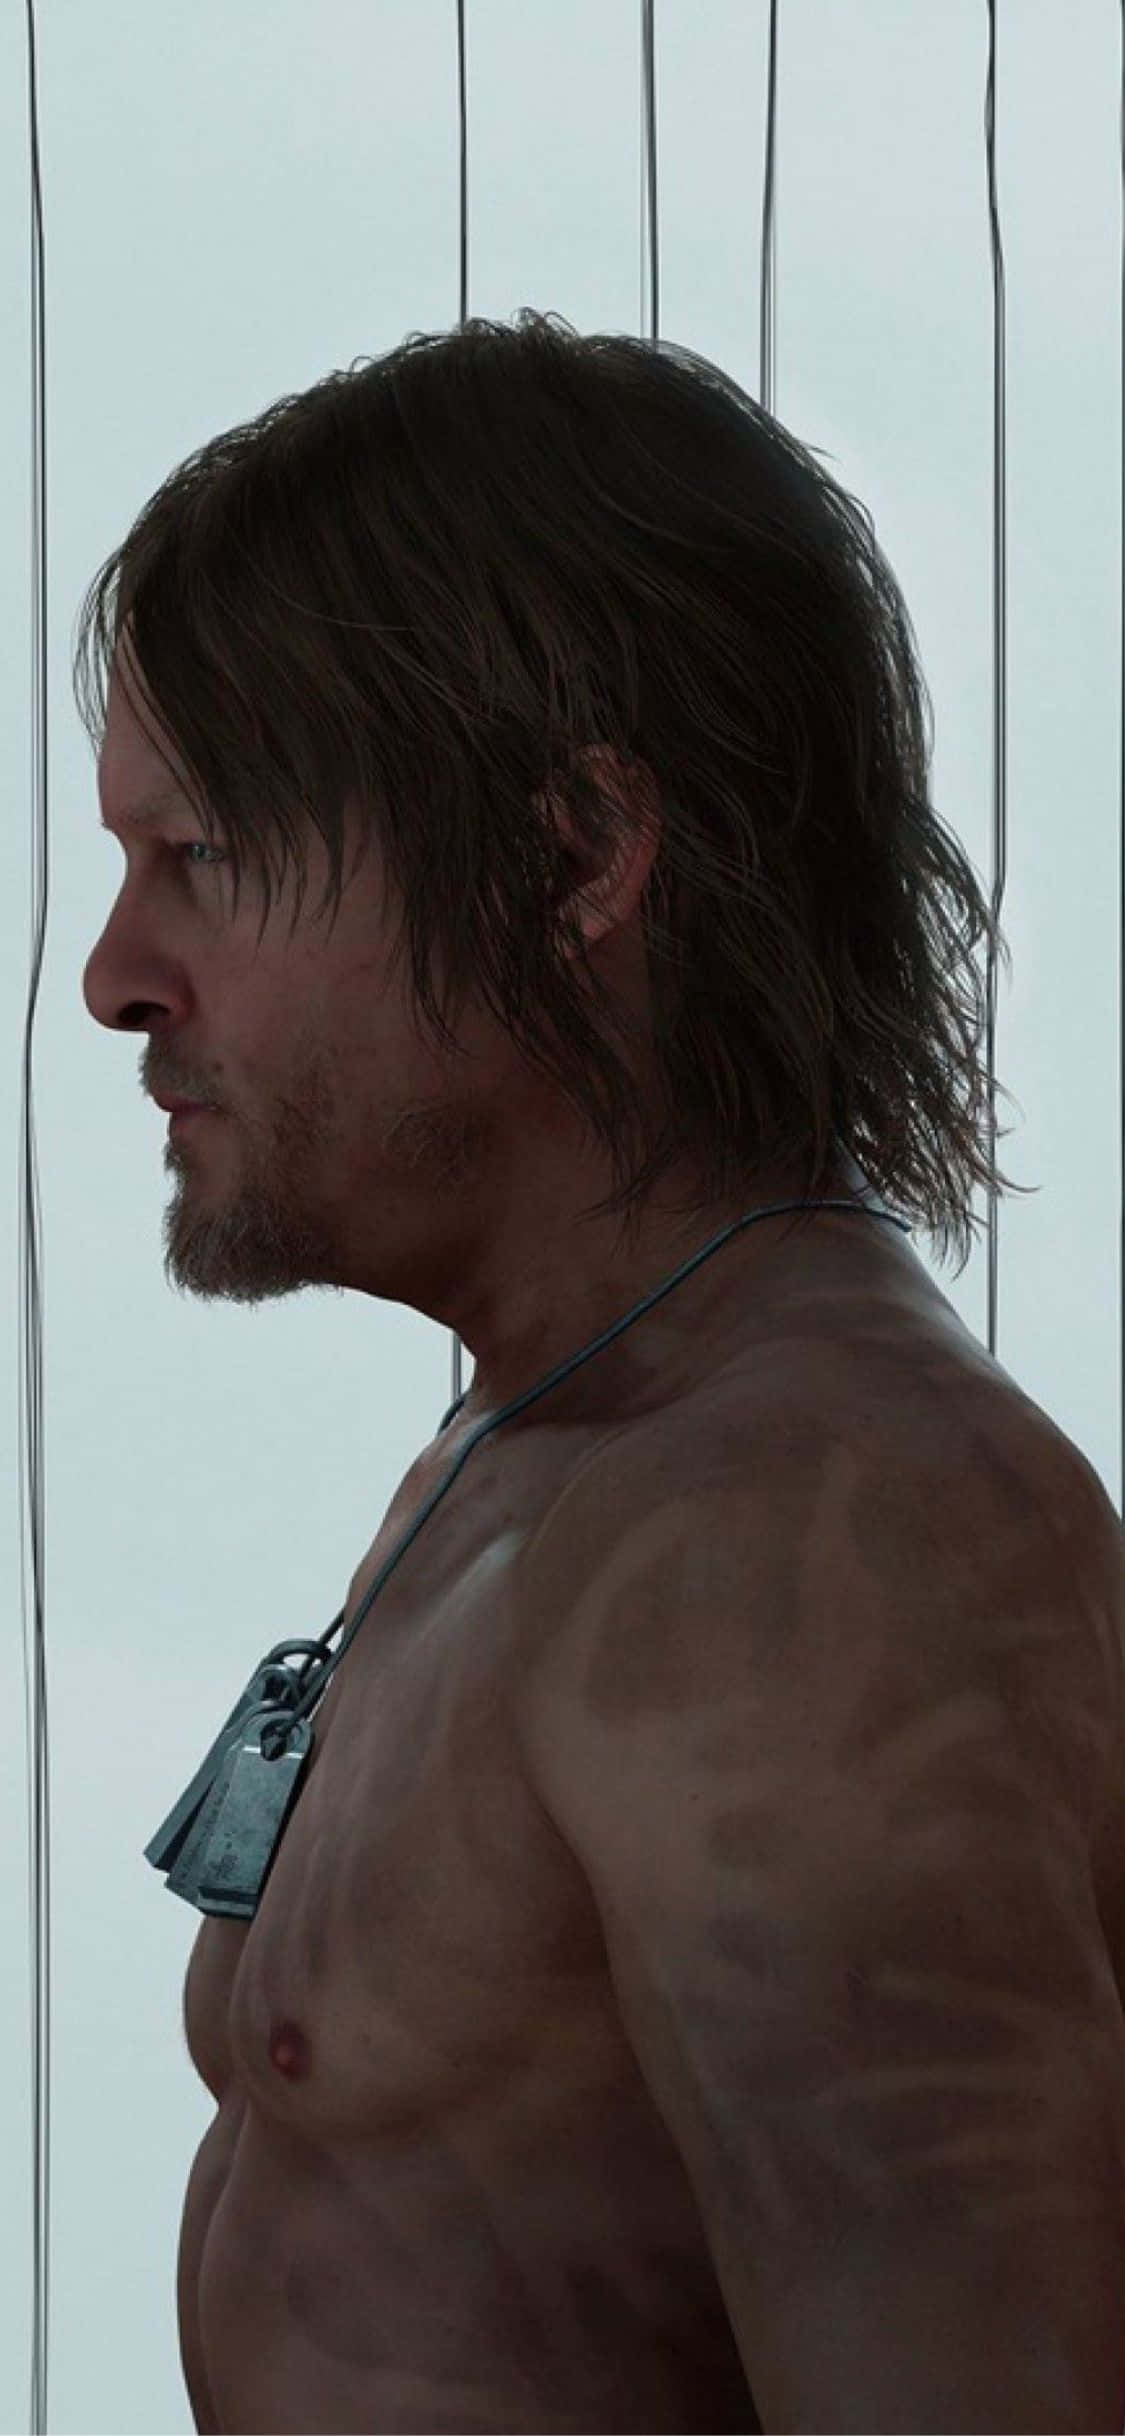 Immerse yourself in the world of Death Stranding with the spectacular graphics of the Iphone X